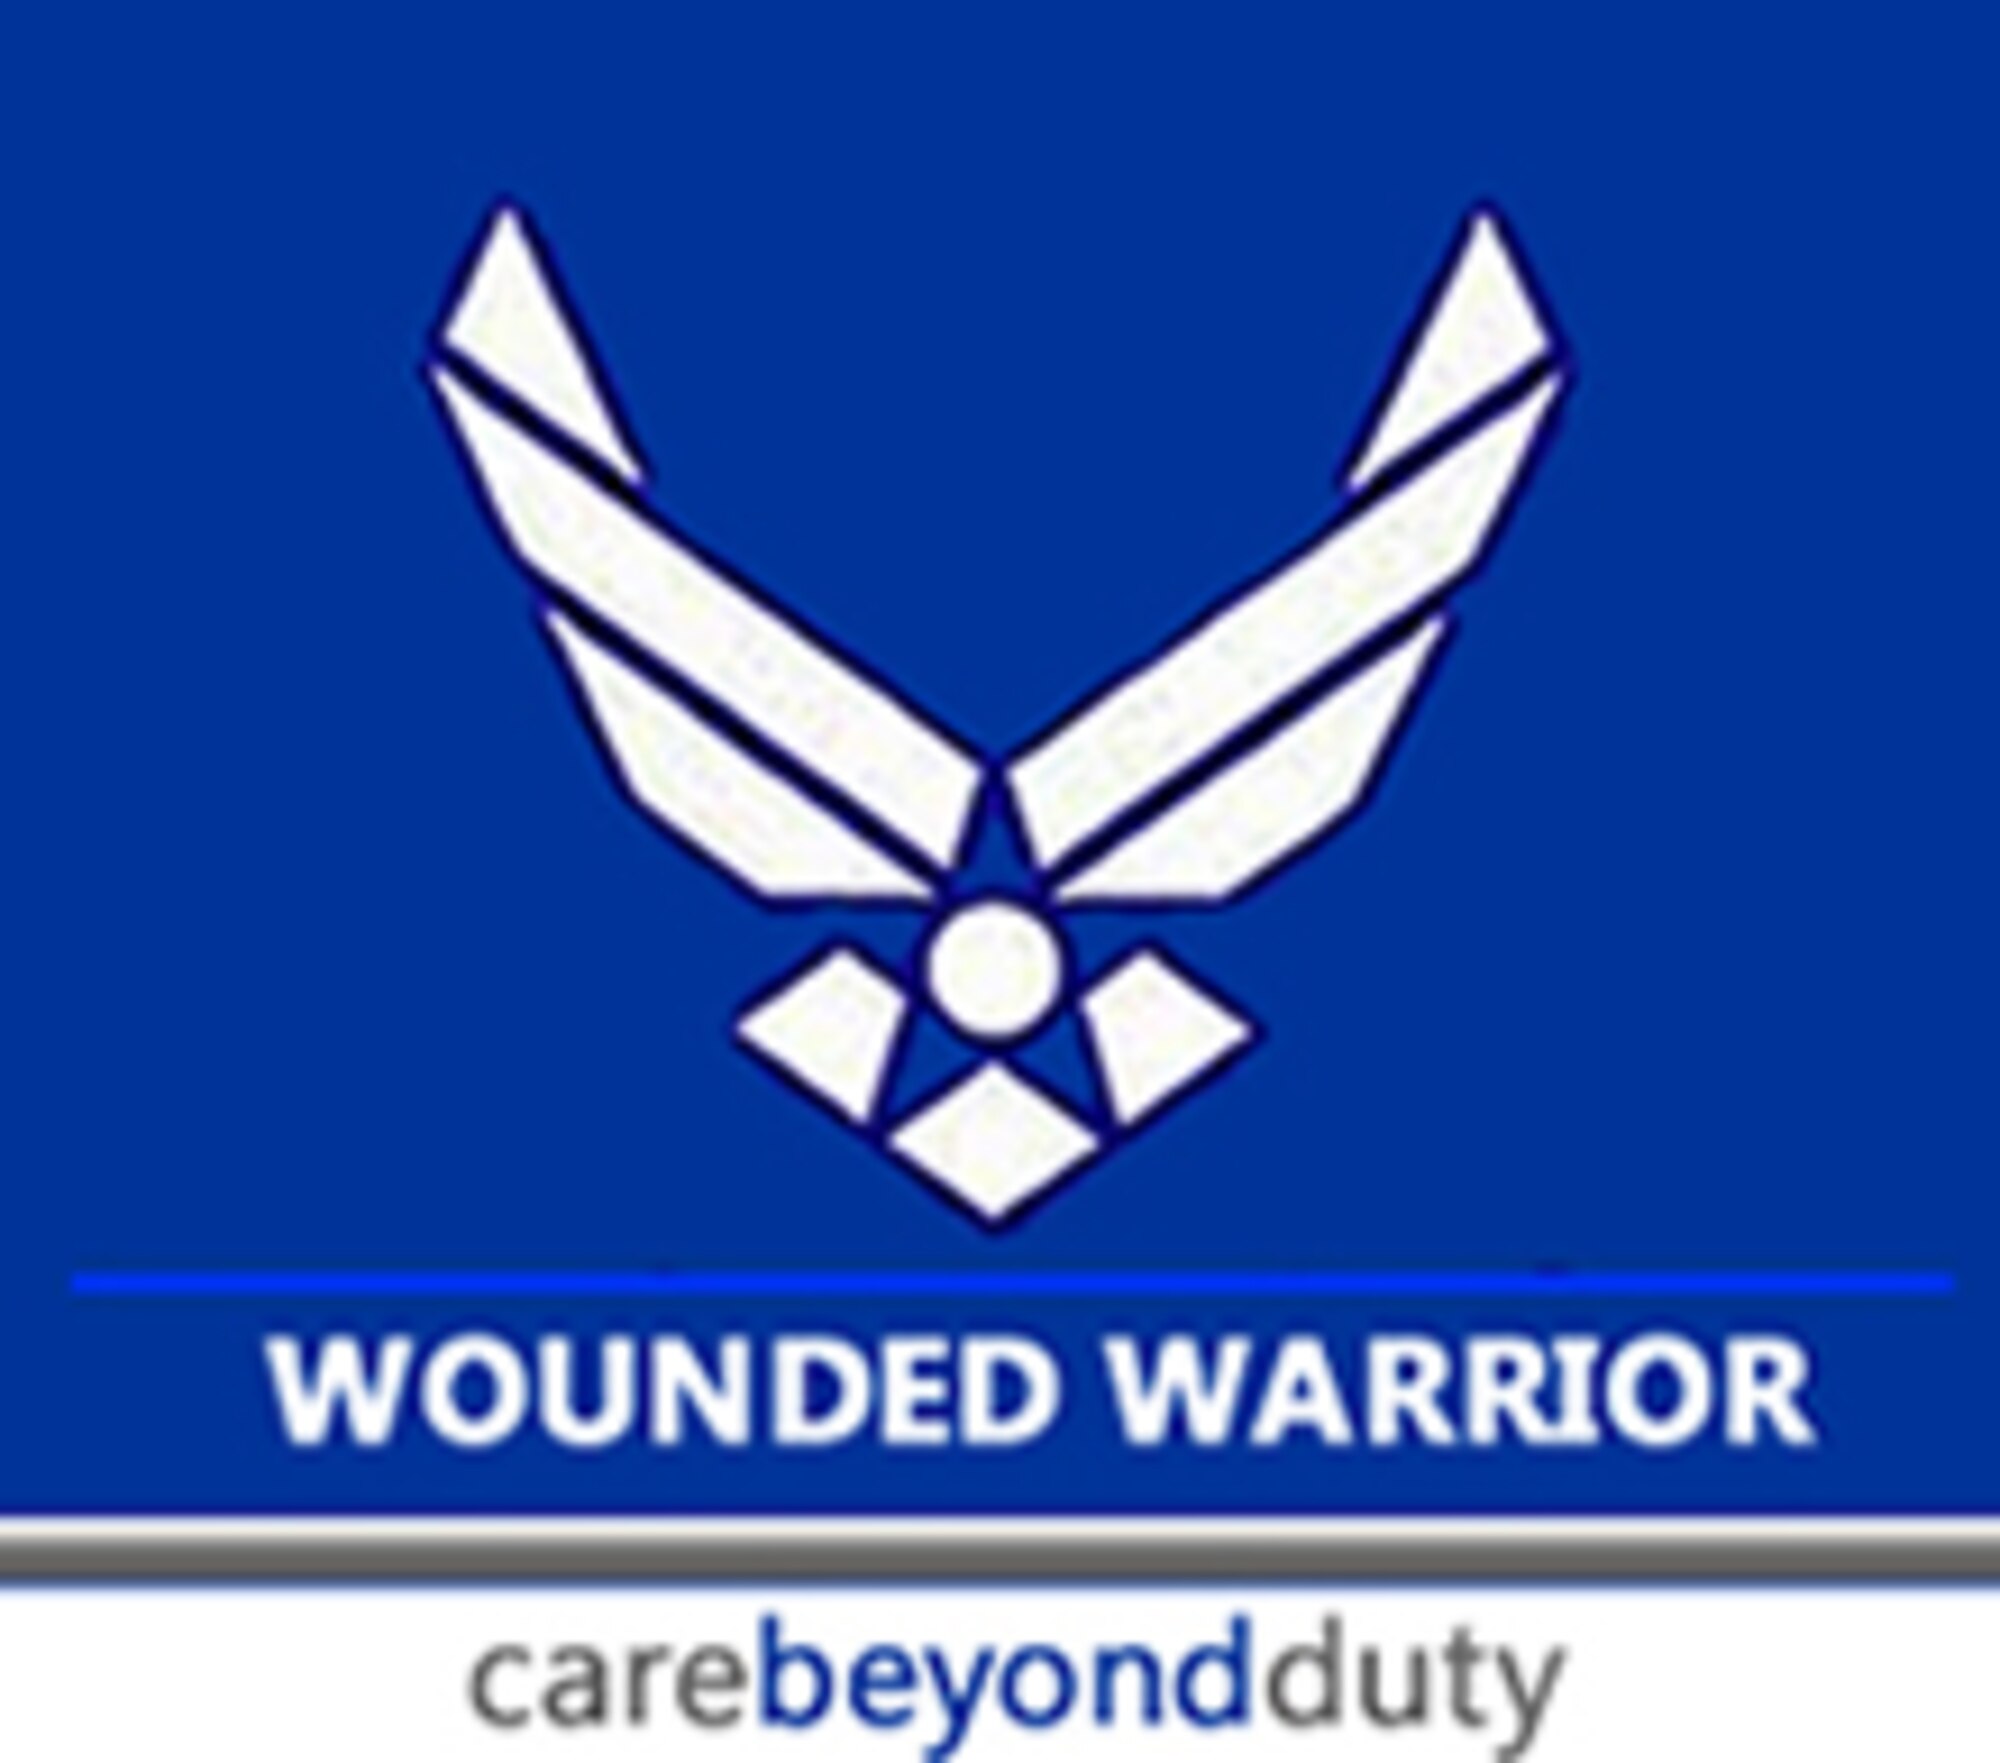 The Air Force Wounded Warrior Program focuses on putting wounded, ill and injured together to strengthen and support each other plus gives Airmen value and a sense of "I can still function and participate in life." (U.S. Air Force Medical Service graphic)   